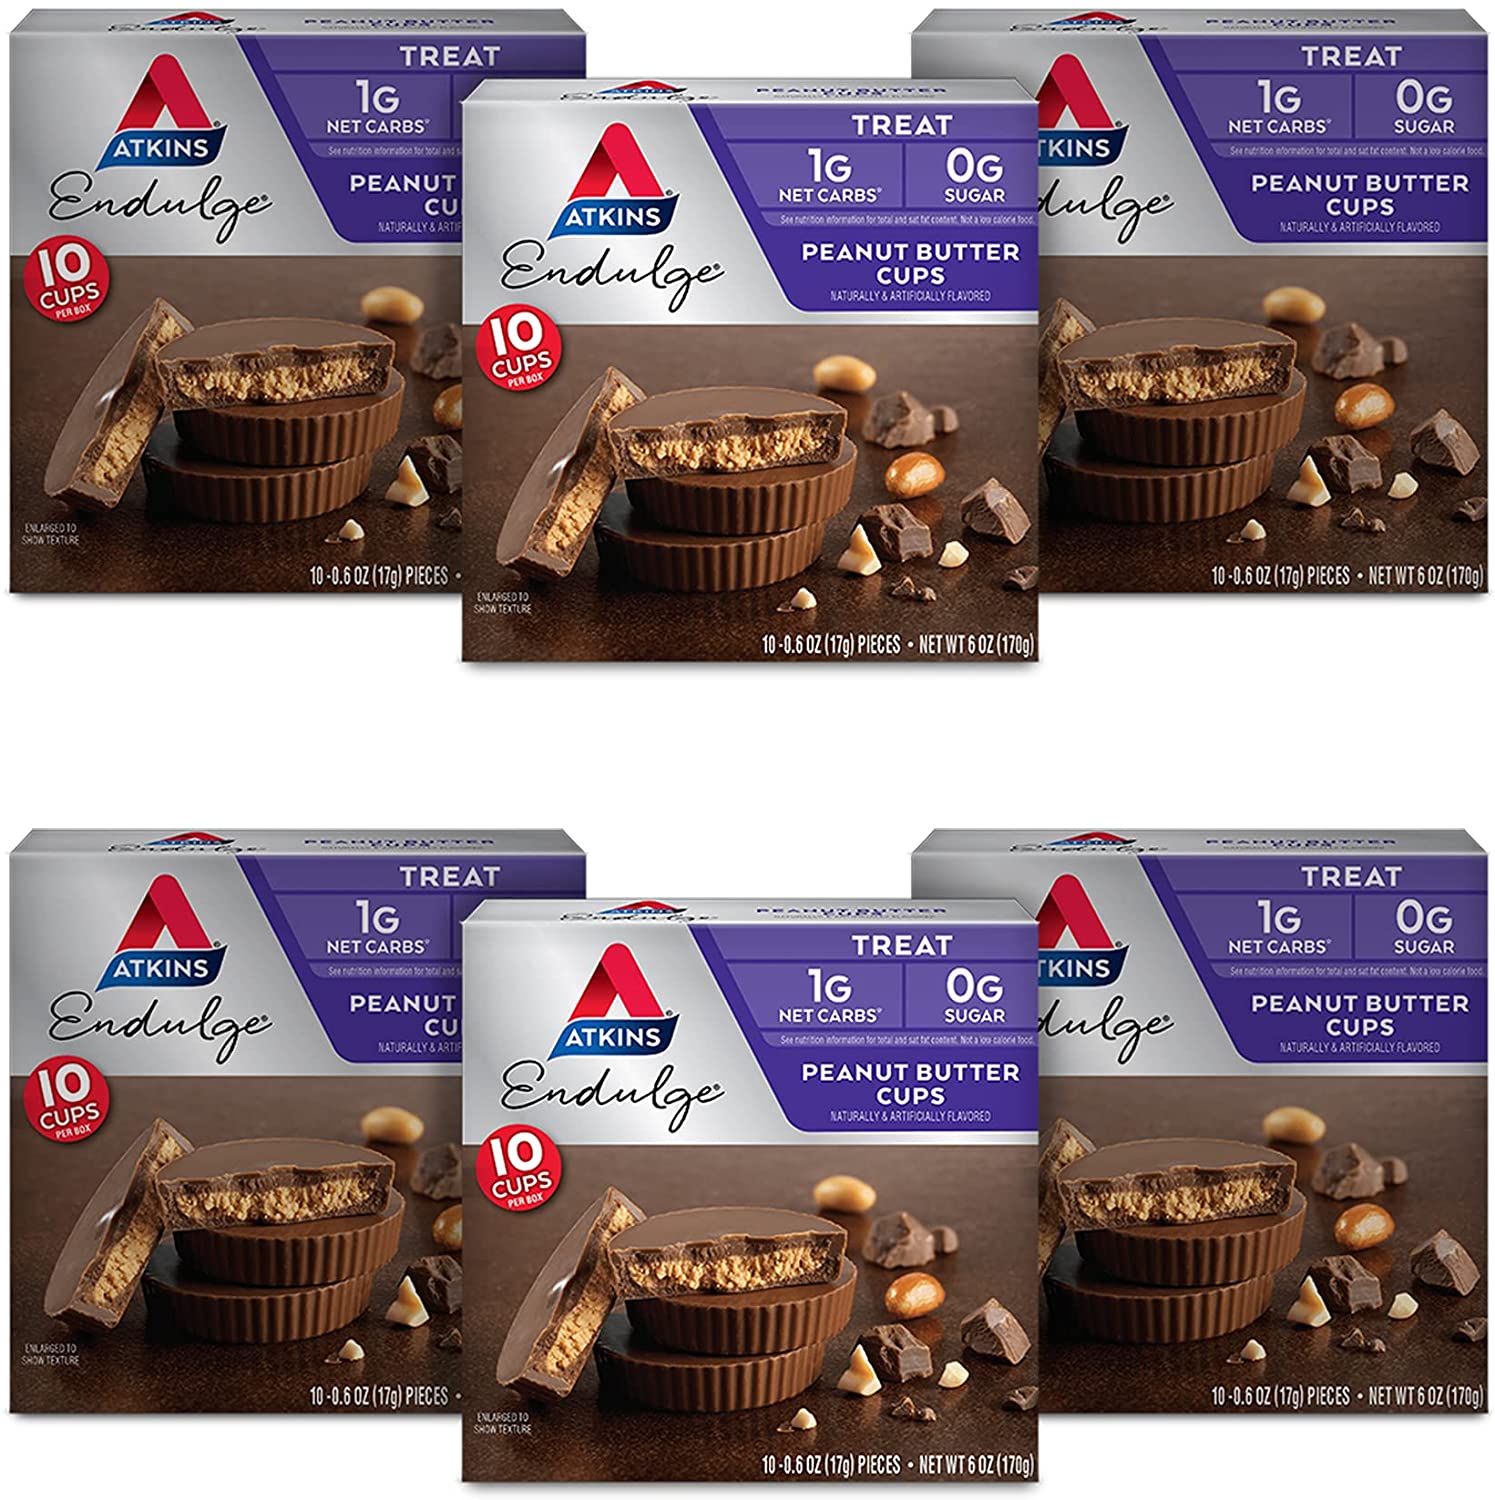 60-Count 0.6-Oz Atkins Endulge Treat Peanut Butter Cups $15.94 + Free Shipping w/ Prime or $25+